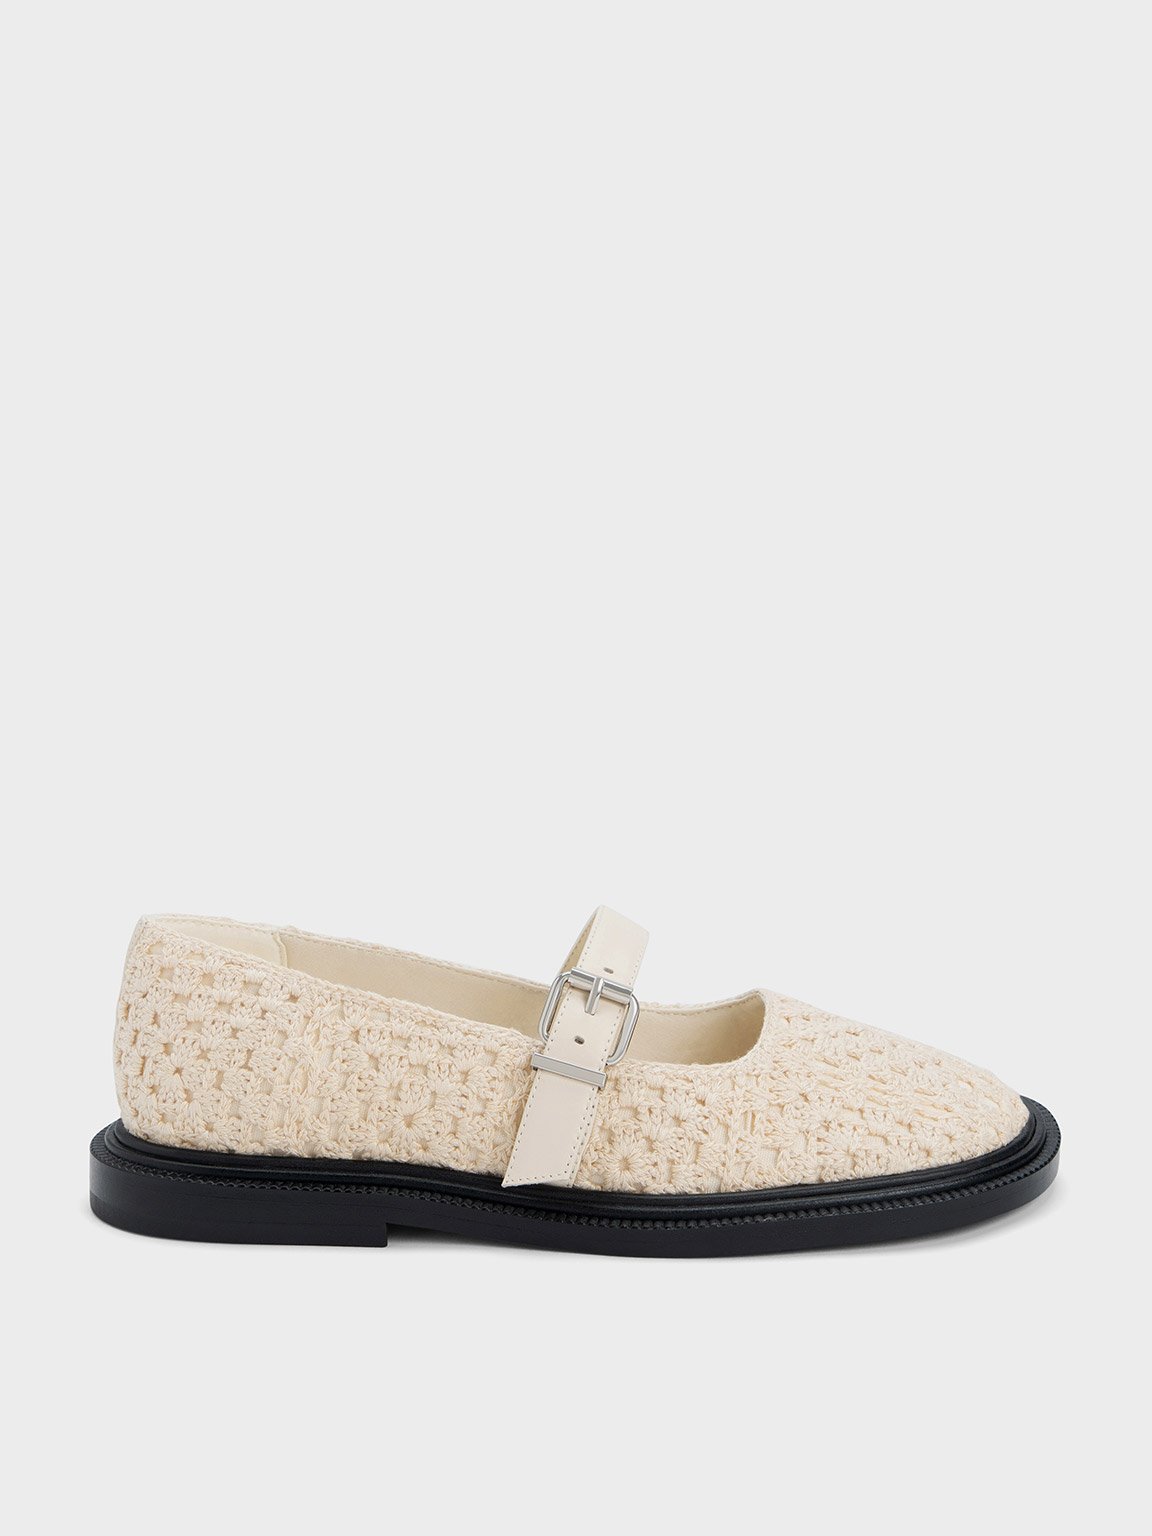 Charles & Keith Crochet & Leather Mary Janes In Chalk